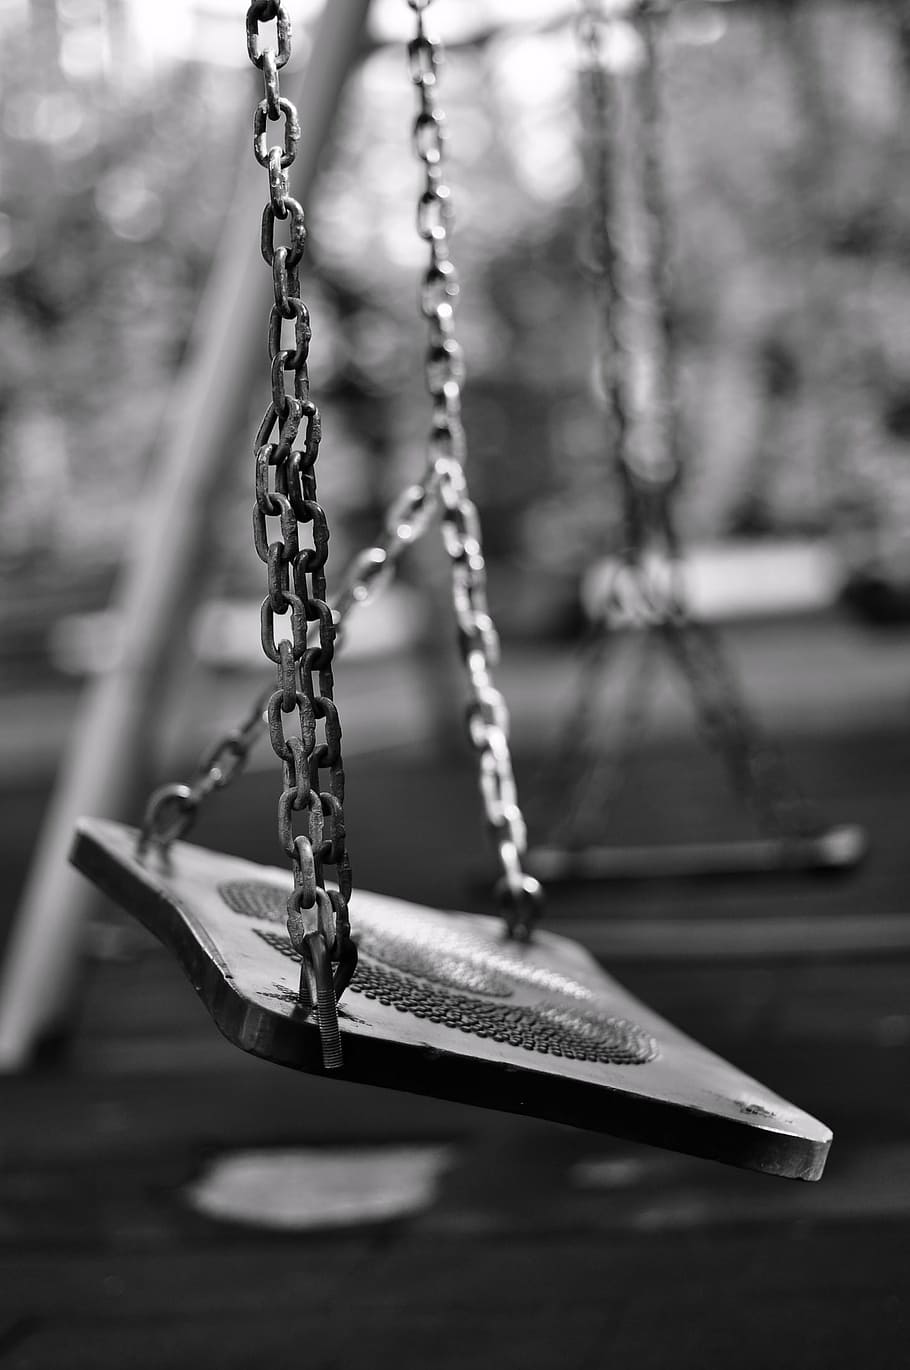 swing, daniel, park, child, entertainment, happiness, playground, focus on foreground, chain, hanging